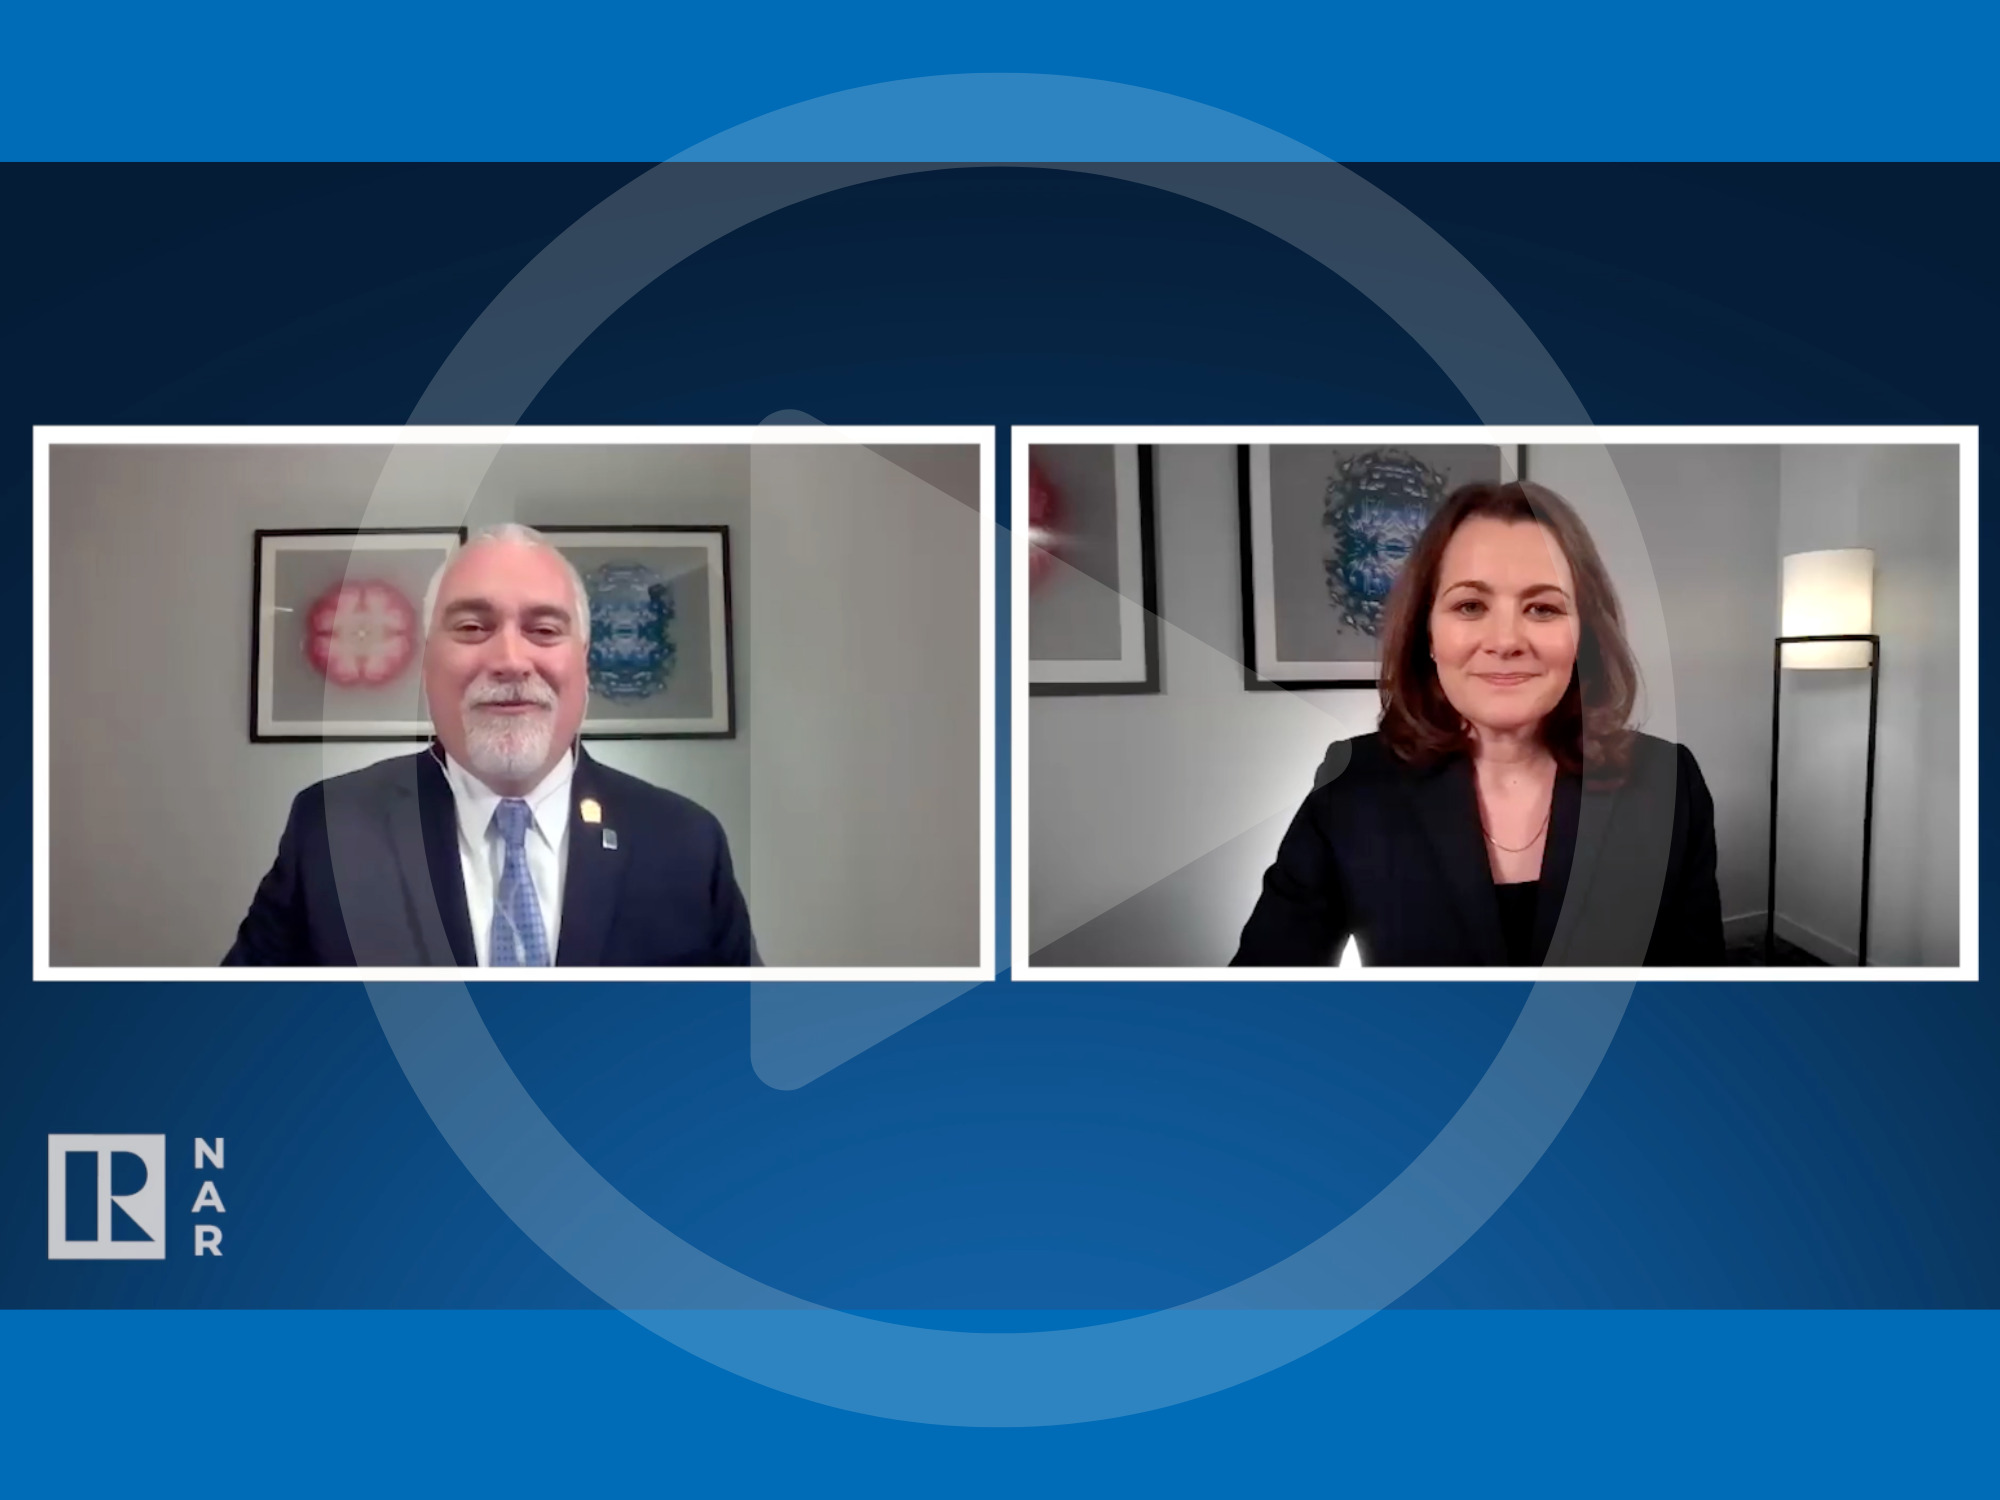 Video with NAR President and Chief Legal Officer